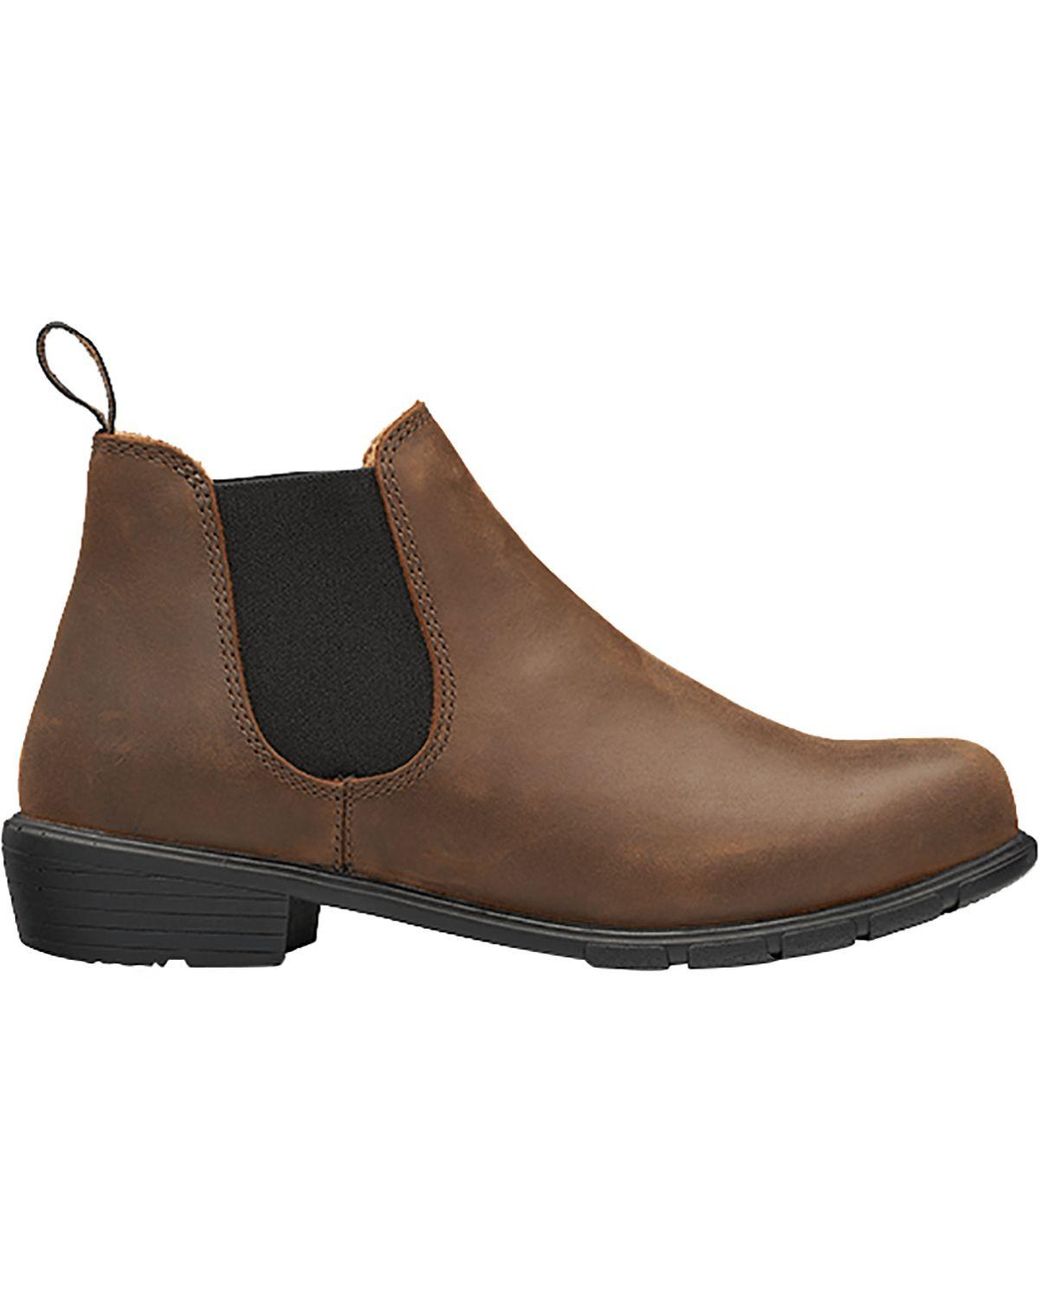 Blundstone Leather Low Heel Boot in Antique Brown (Brown) - Lyst